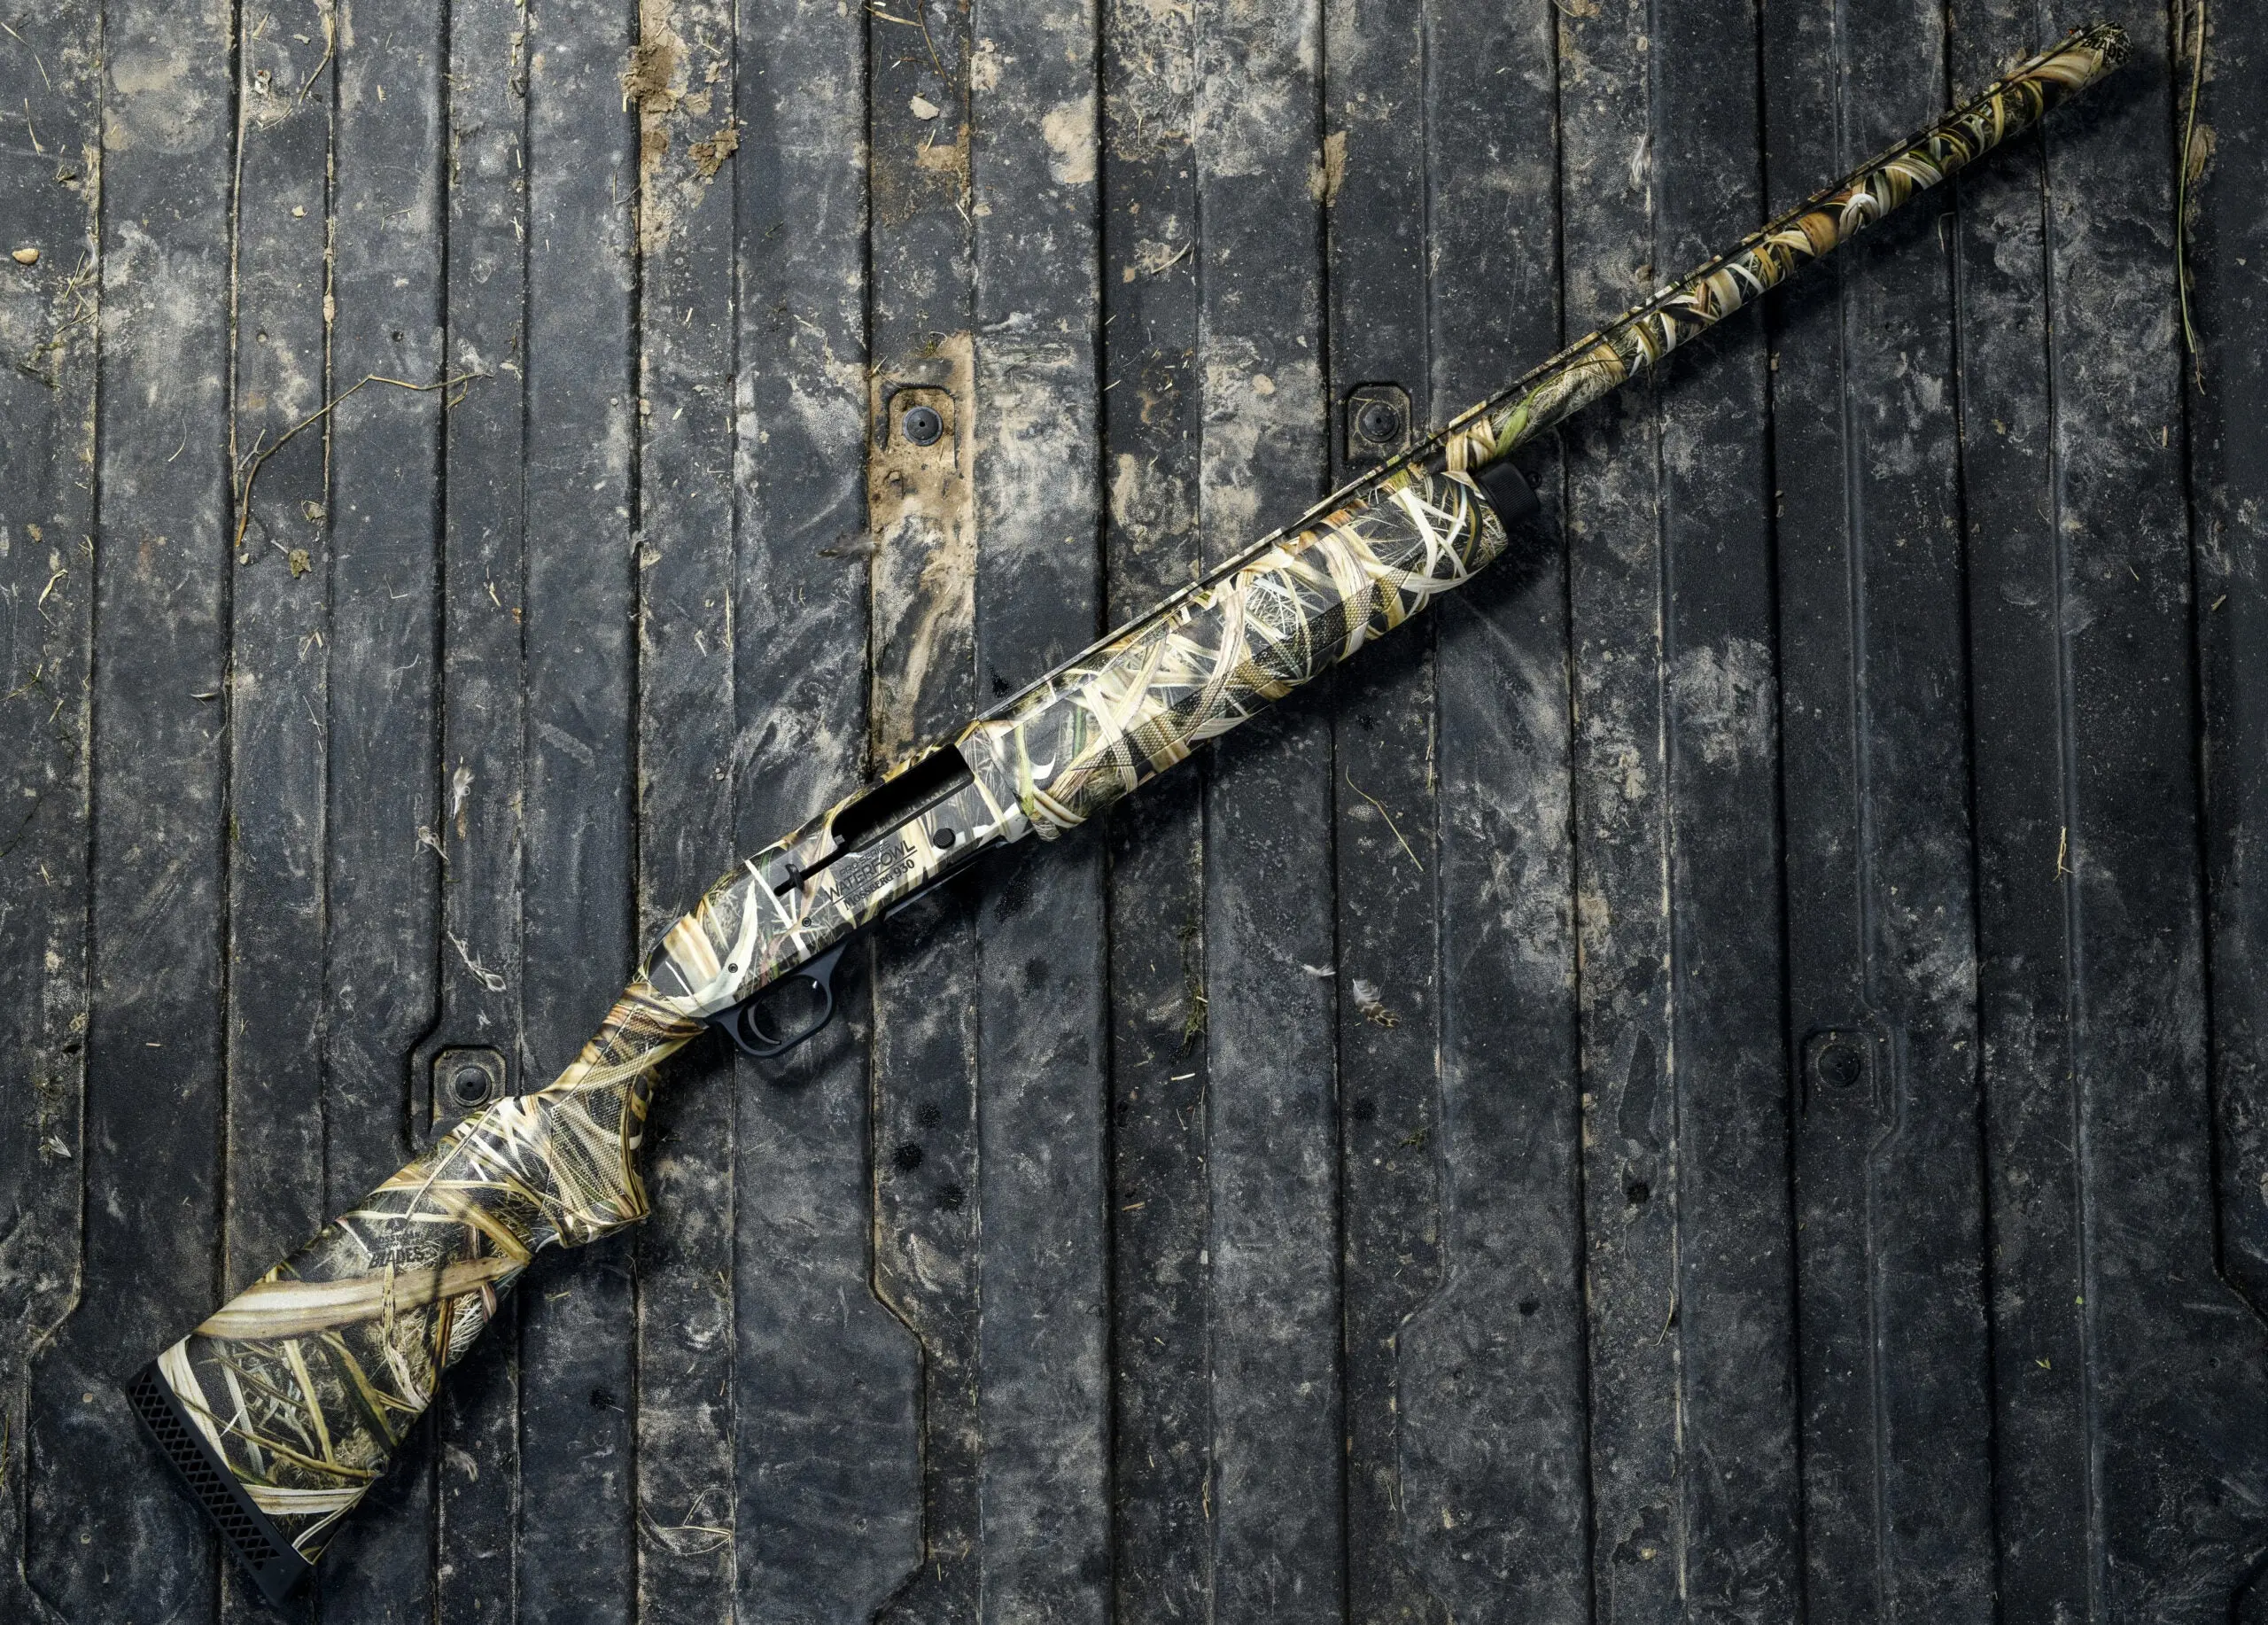 The Mossberg 930 Pro is a duck hunting shotgun